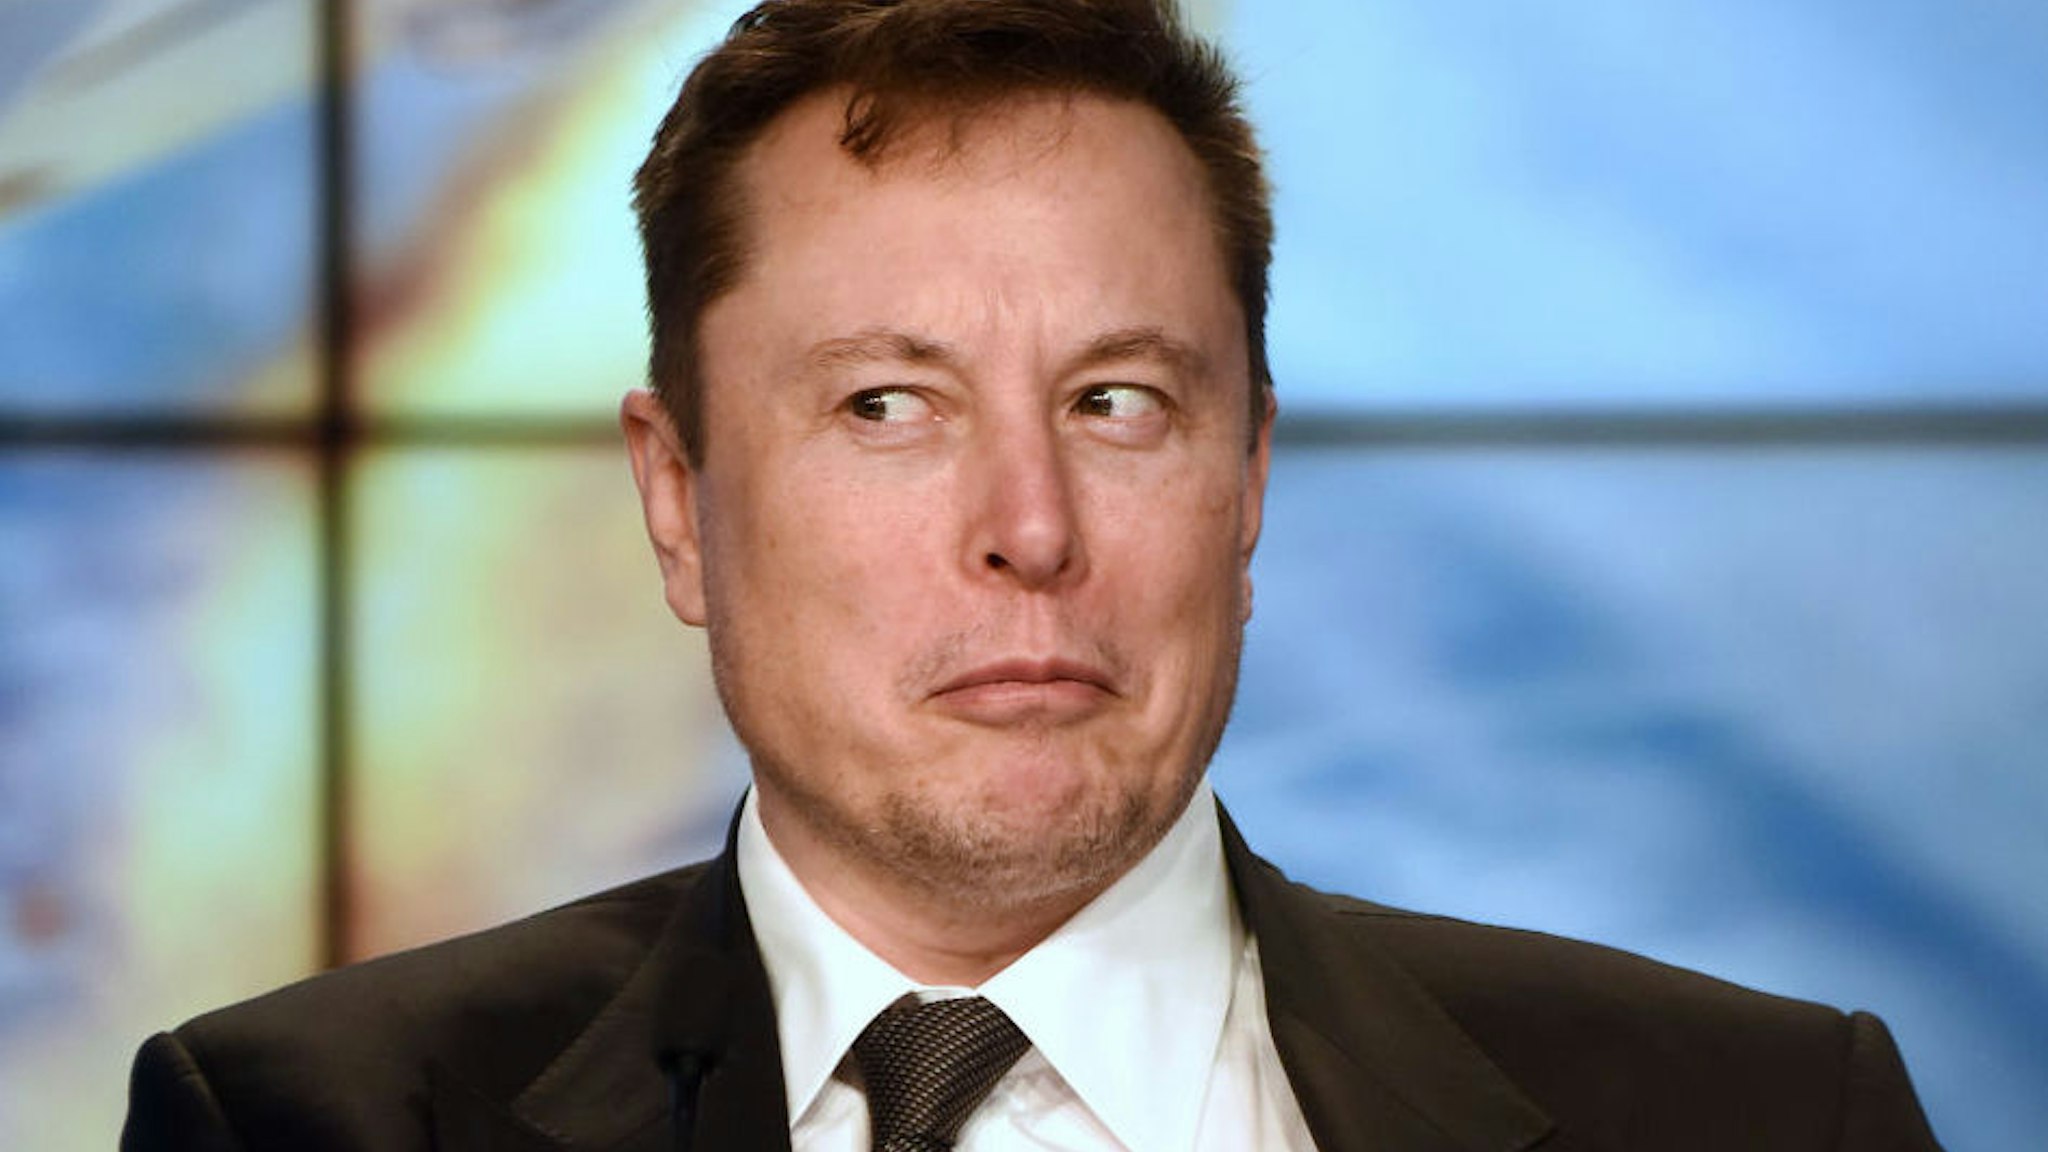 Kennedy Space Center, Florida, United States - SpaceX CEO Elon Musk reacts to a question from the media at a press conference following the successful In-Flight Abort Test of the SpaceX Falcon 9 rocket and Crew Dragon capsule on January 19, 2020 at the Kennedy Space Center in Florida.